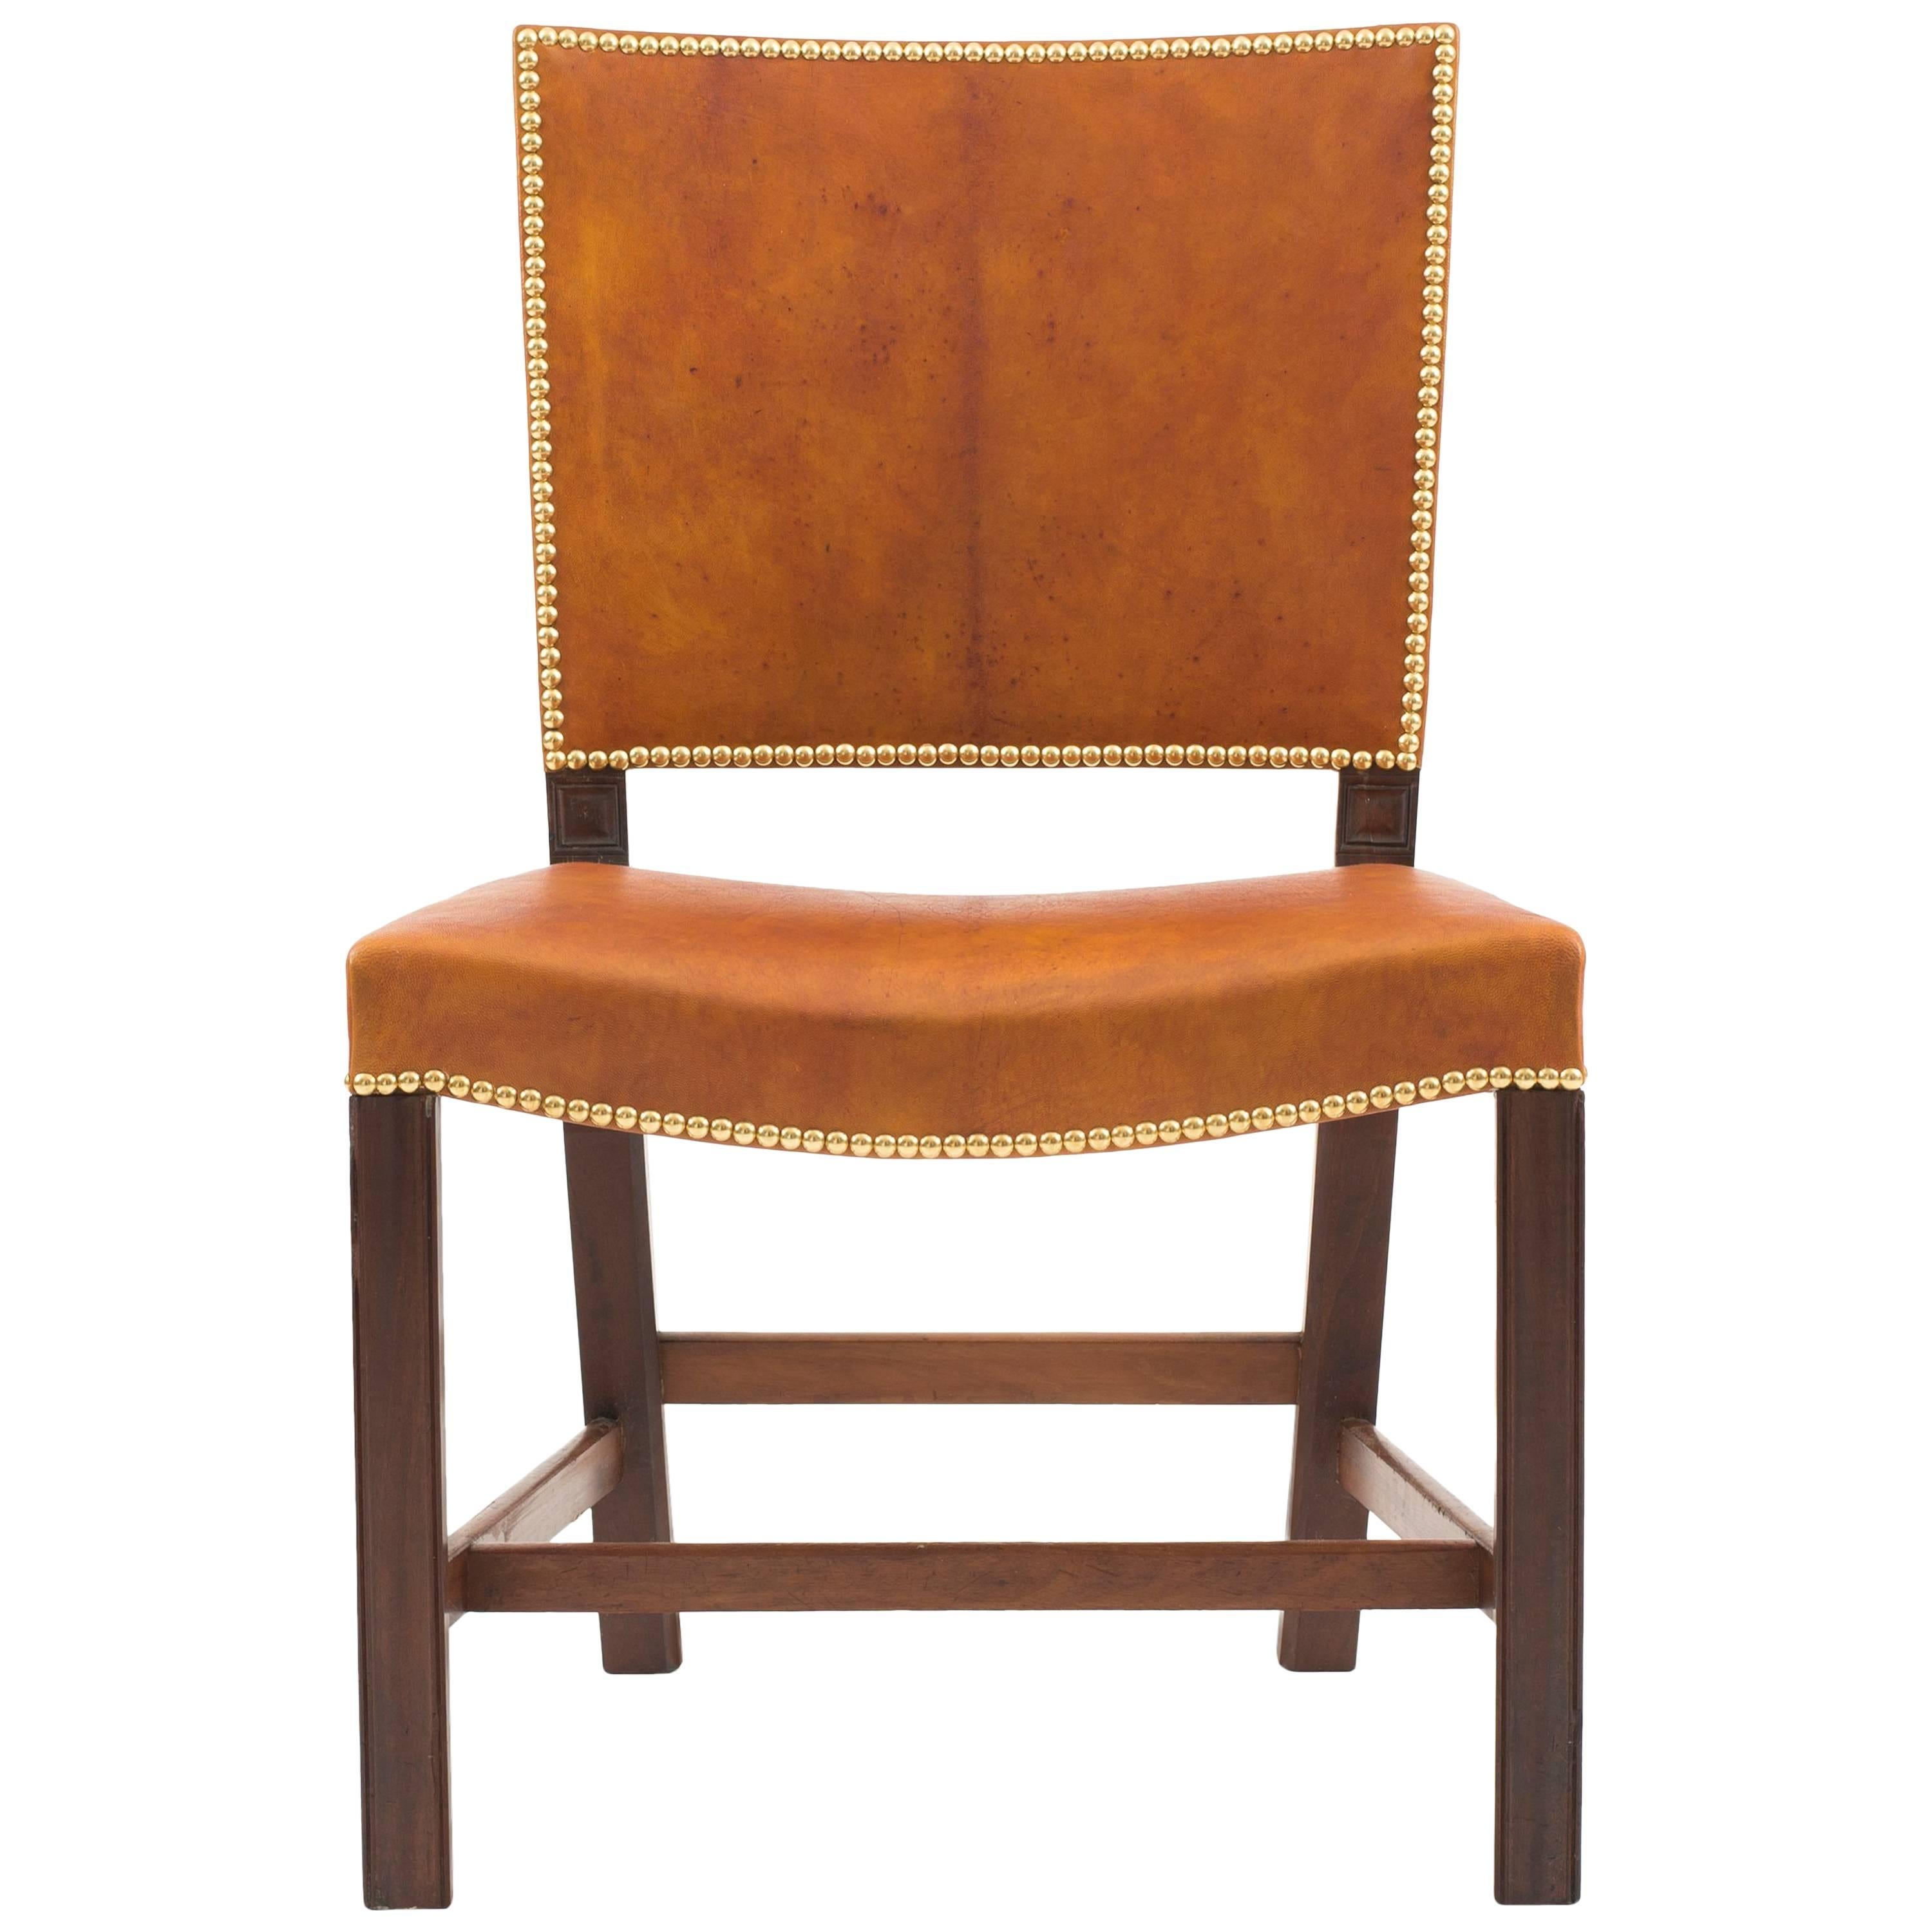 Kaare Klint Red Chair in Cuban Mahogany and Niger Leather, 1928